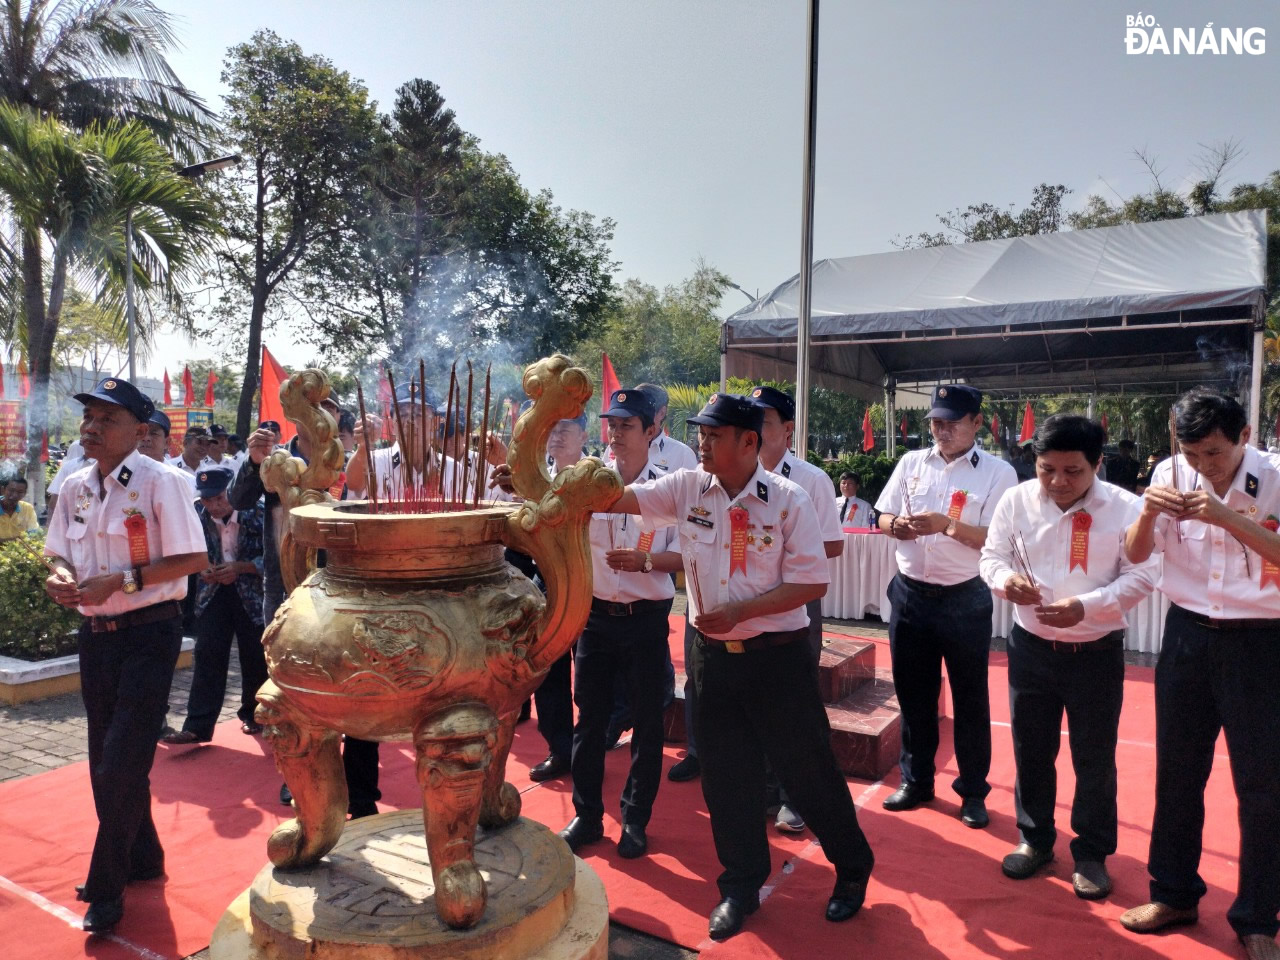 War veterans who used to be stationed on the Truong Sa offered incense to commemorate 64 martyrs who laid down their lives in the Gac Ma Island battle.